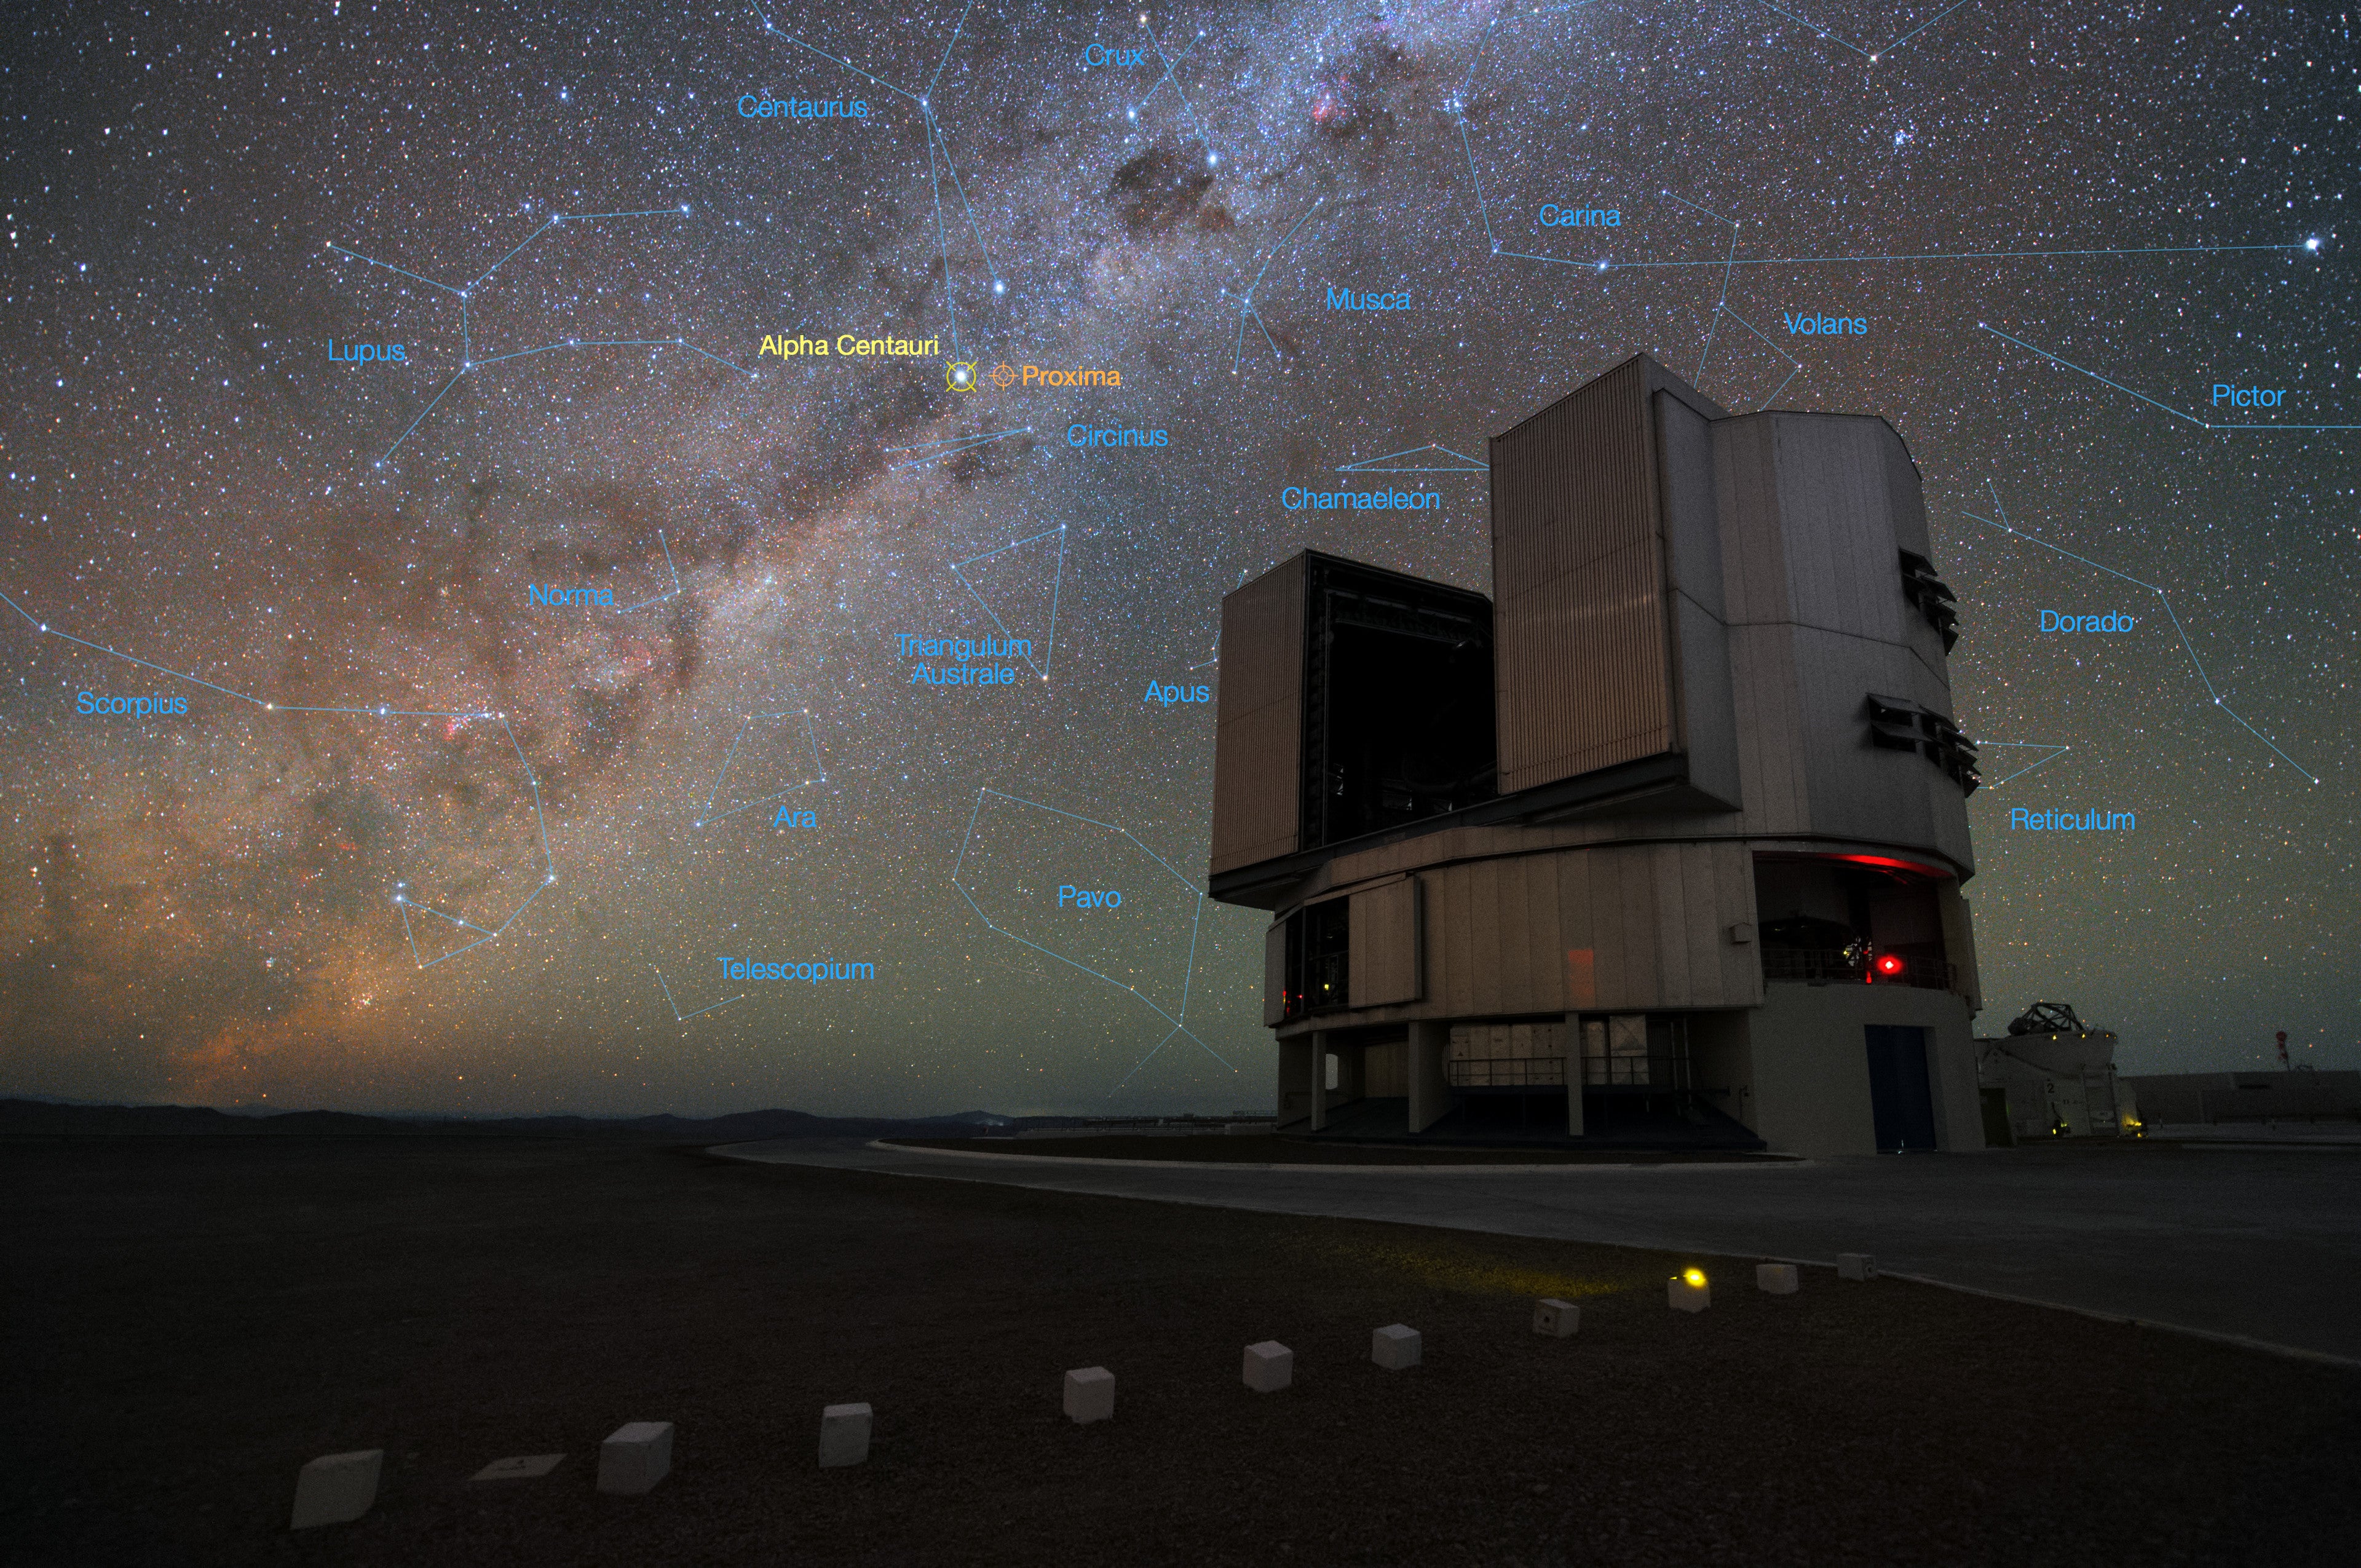 Closest Star Proxima Centauri Has a Dust Belt, Maybe More Planets